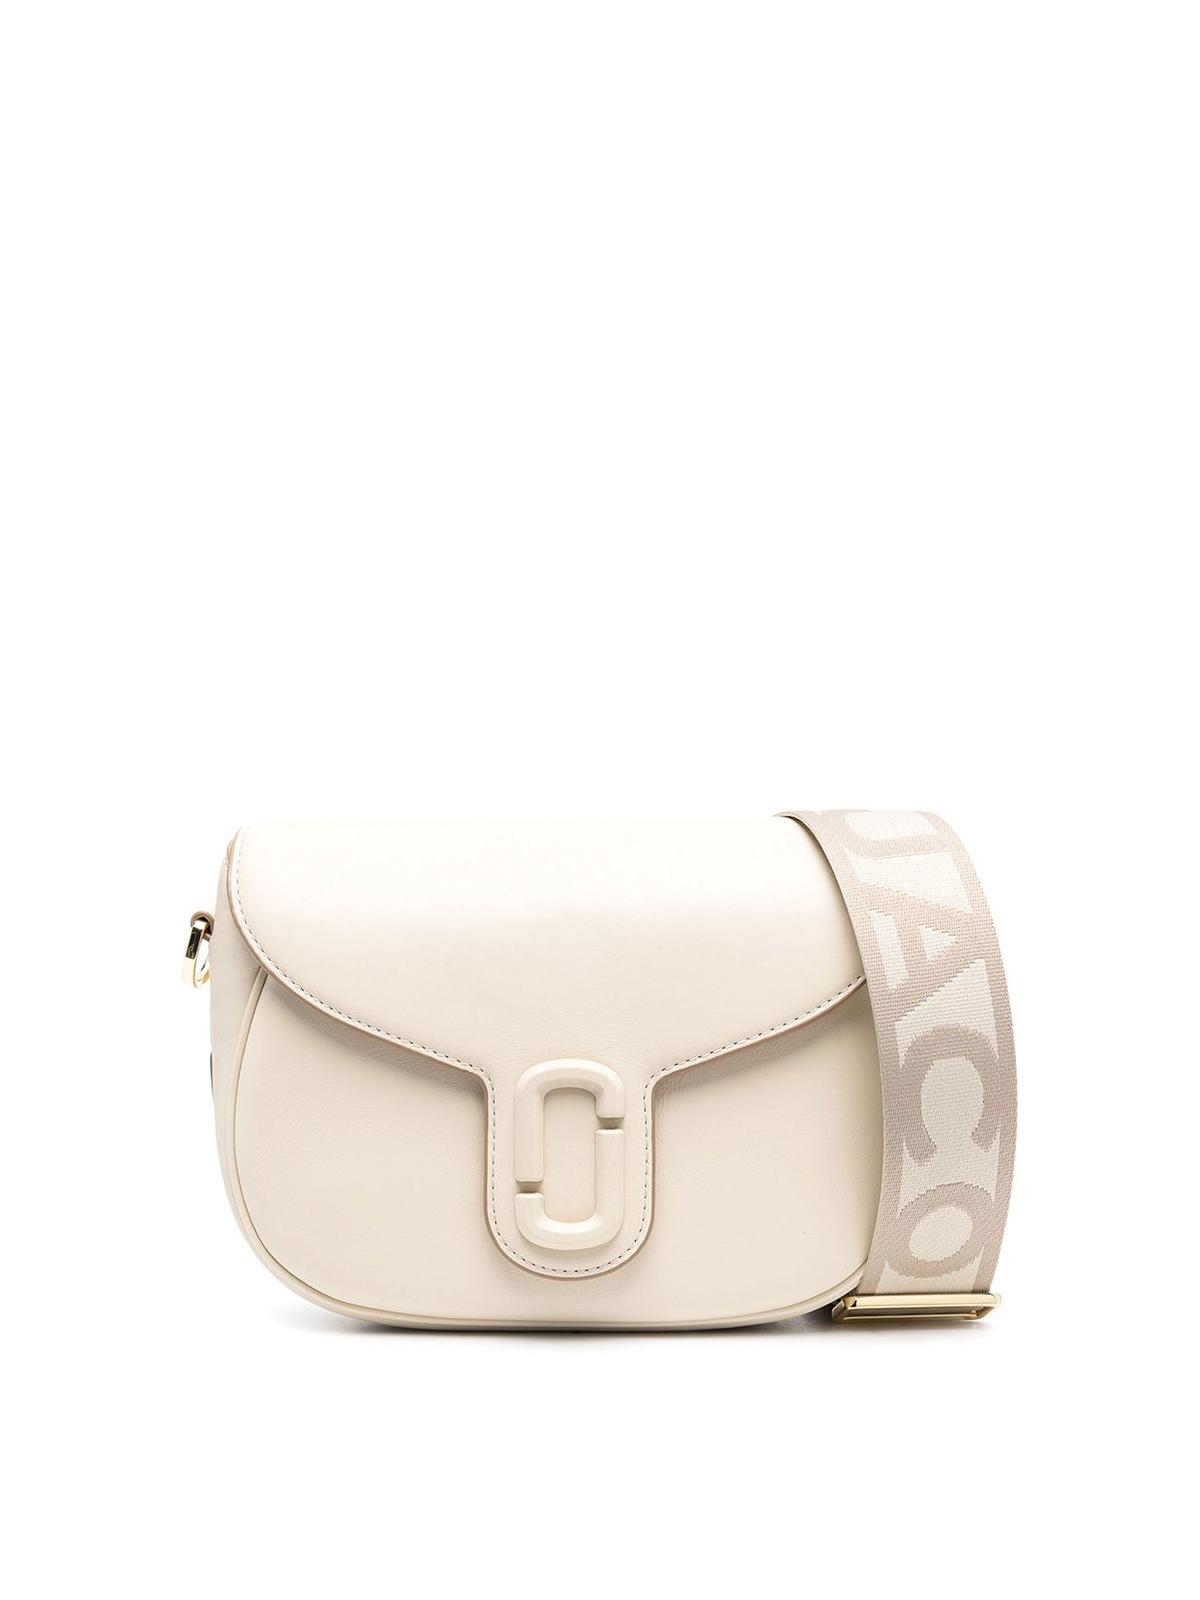 Marc Jacobs White Snapshot Leather Cross-body Bag